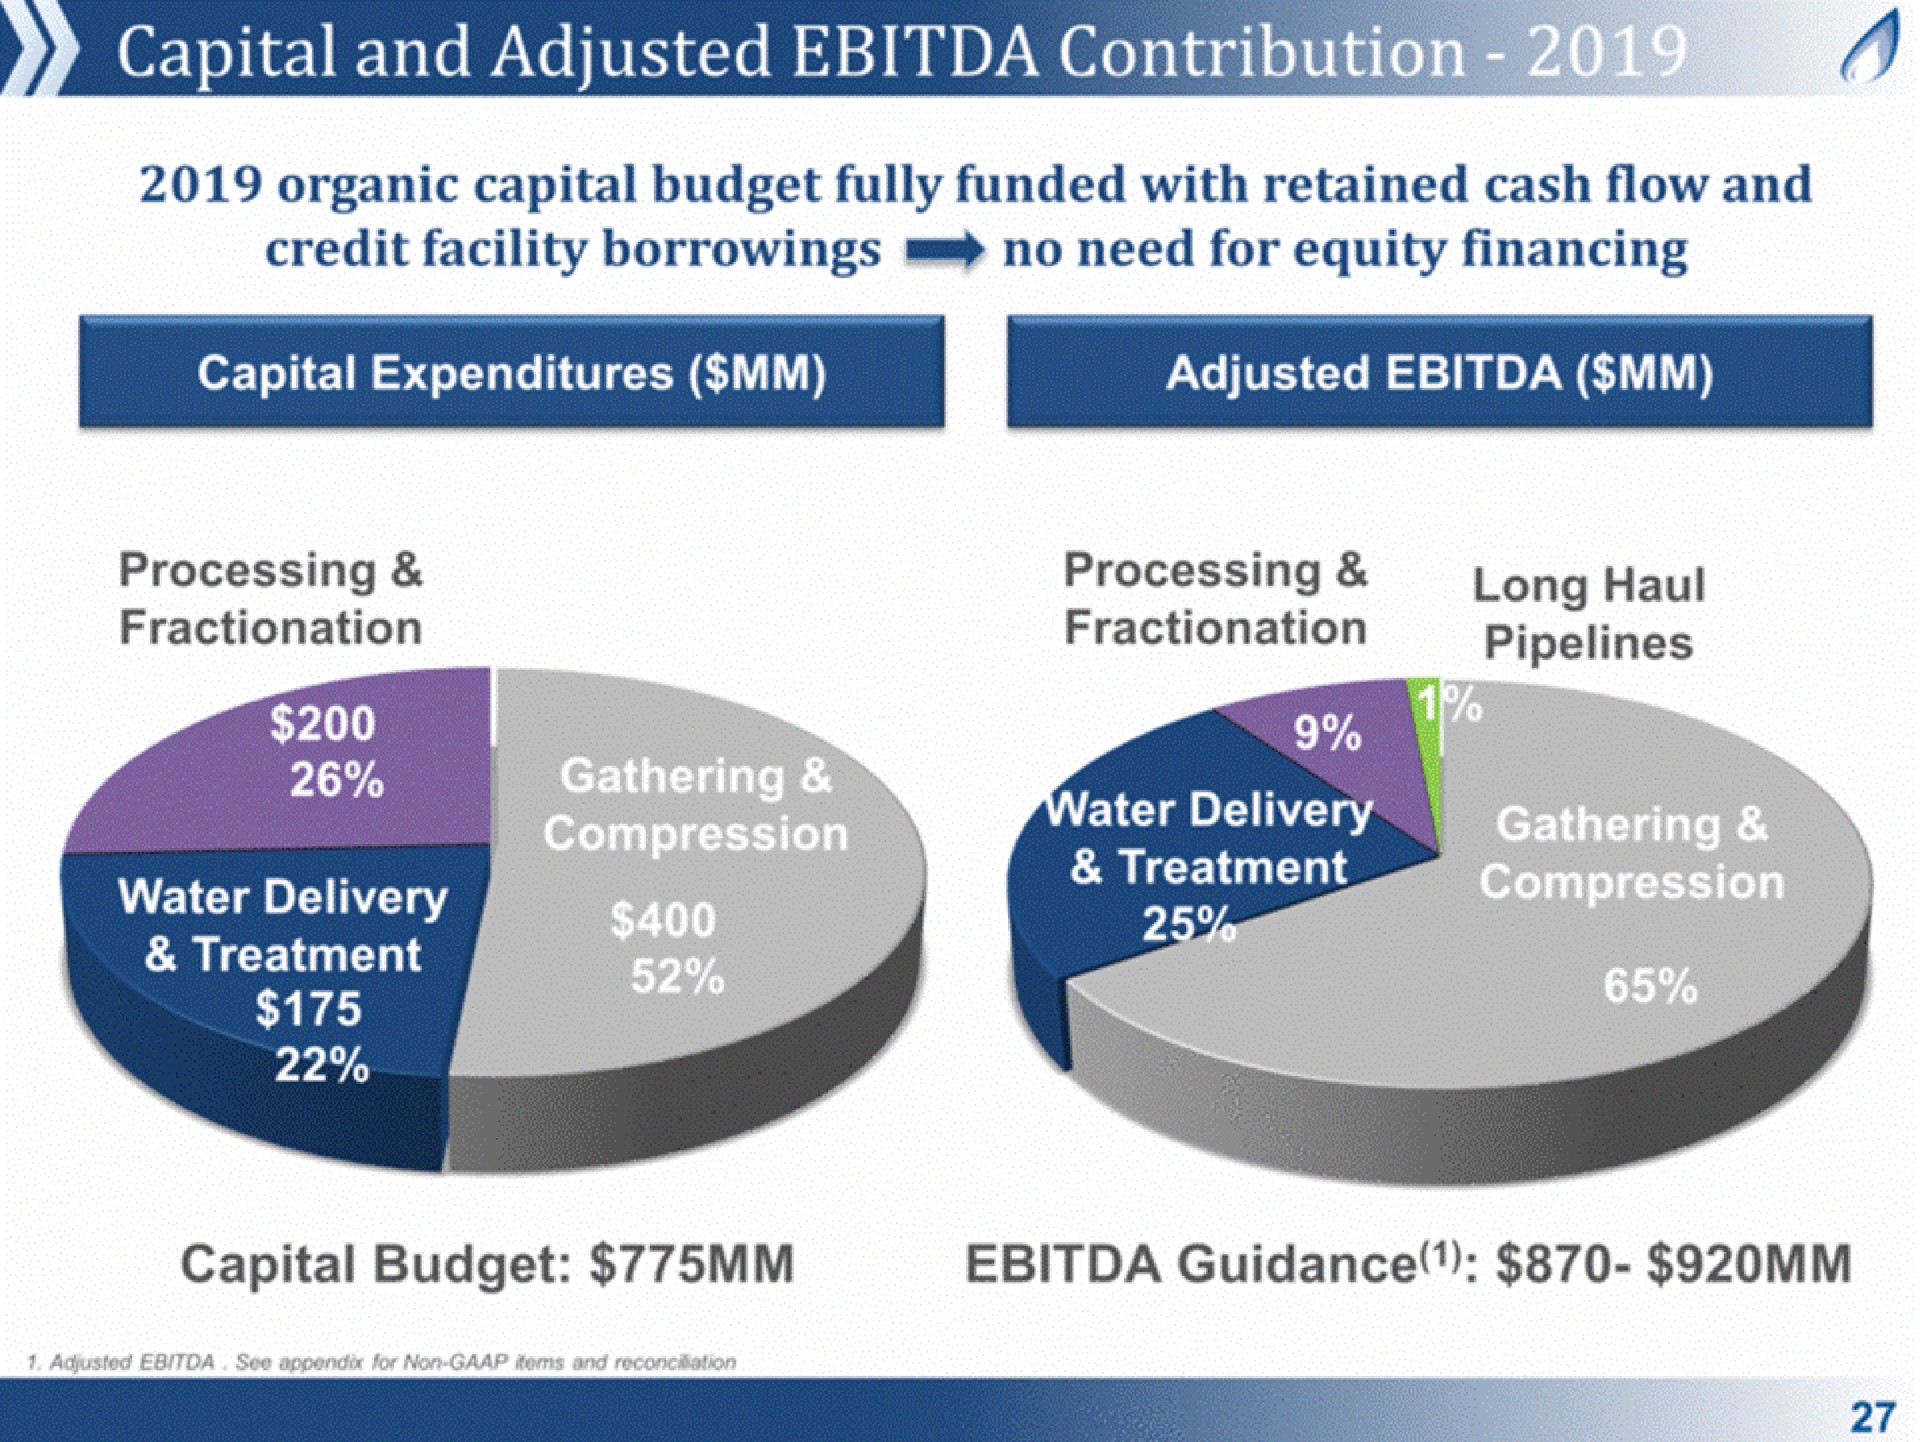 capital and adjusted capital budget guidance | Antero Midstream Partners